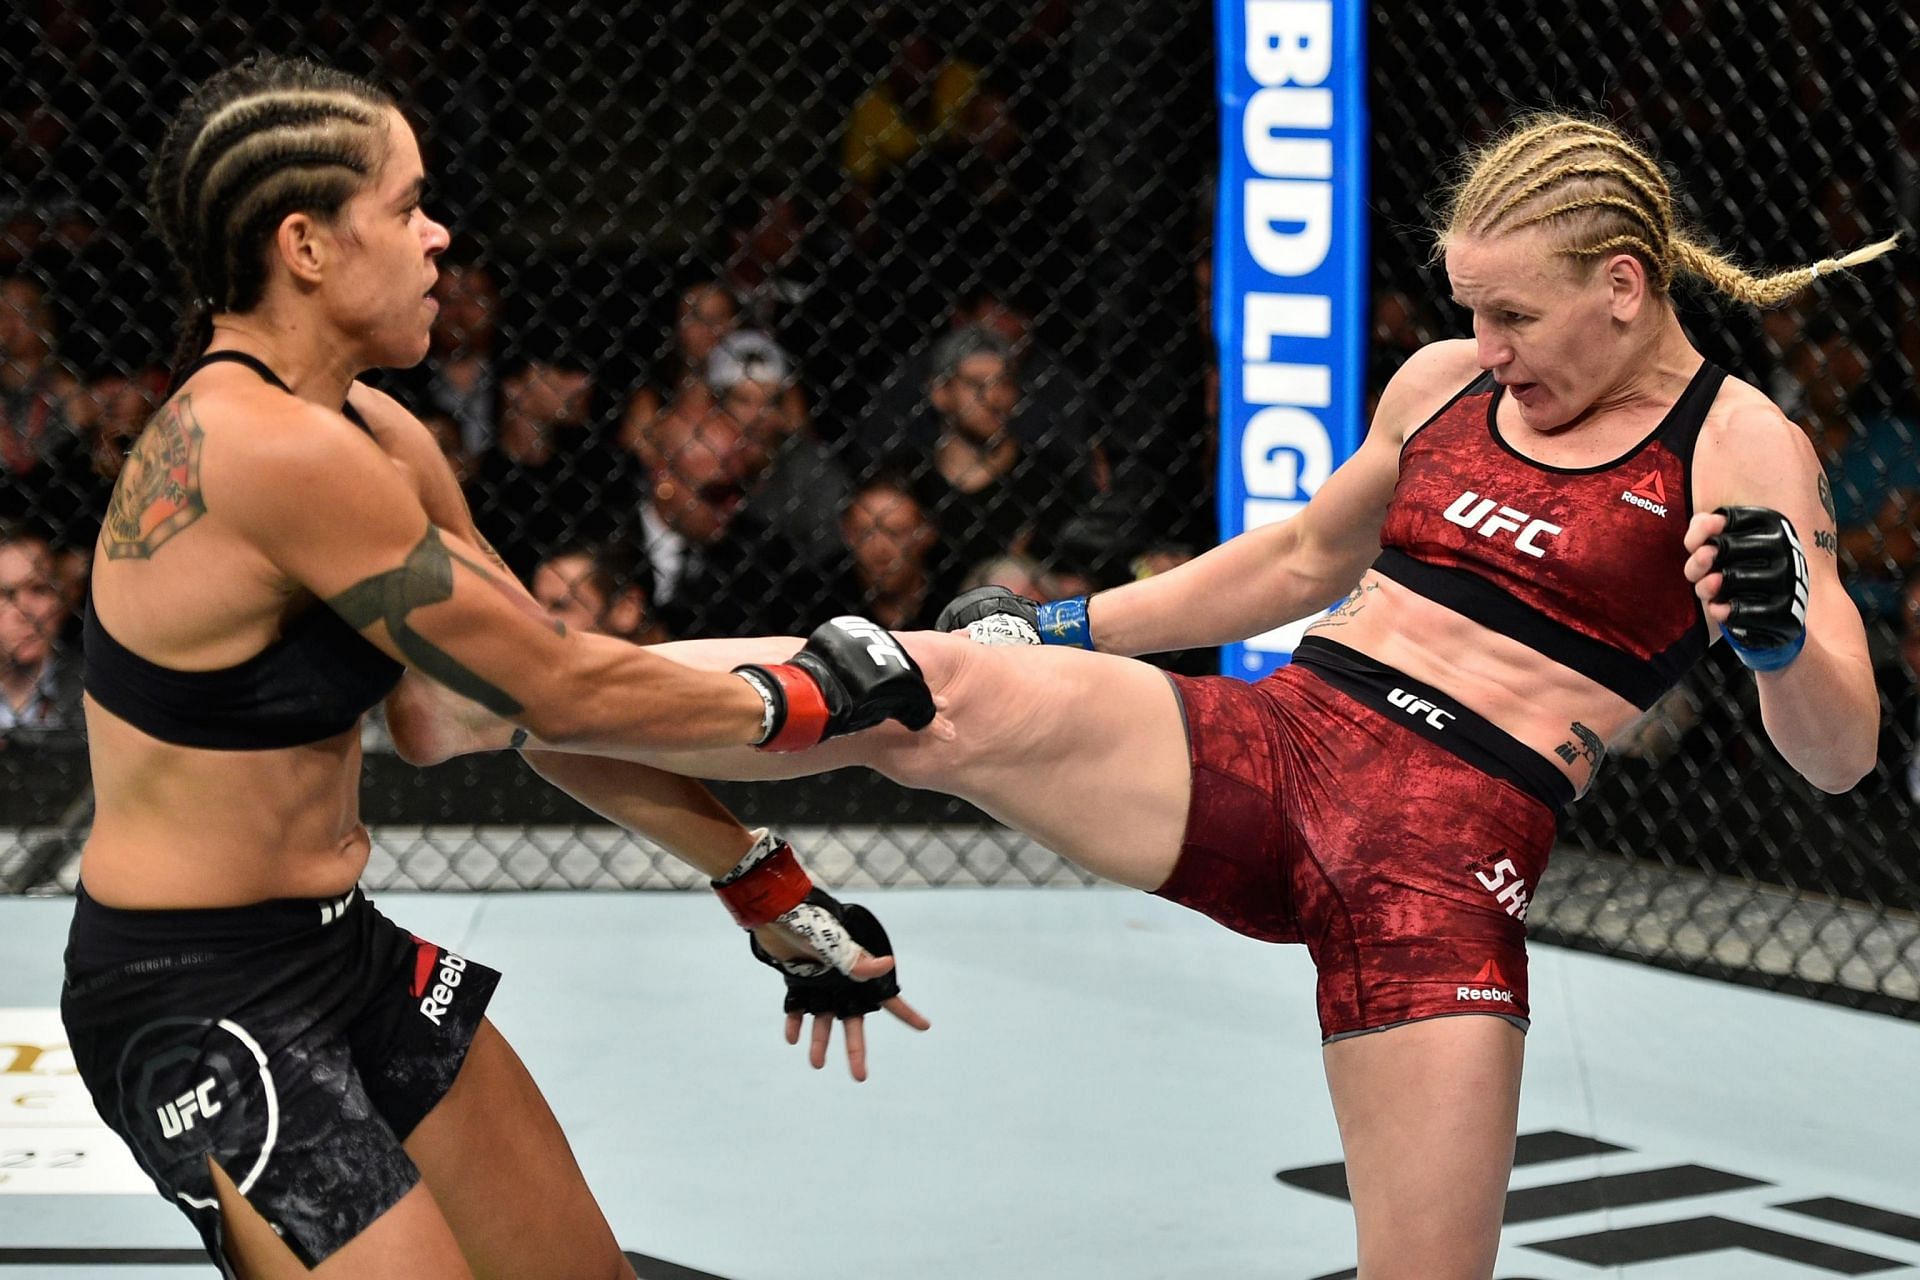 After two dull bouts, nobody needs to see a third fight between Amanda Nunes and Valentina Shevchenko